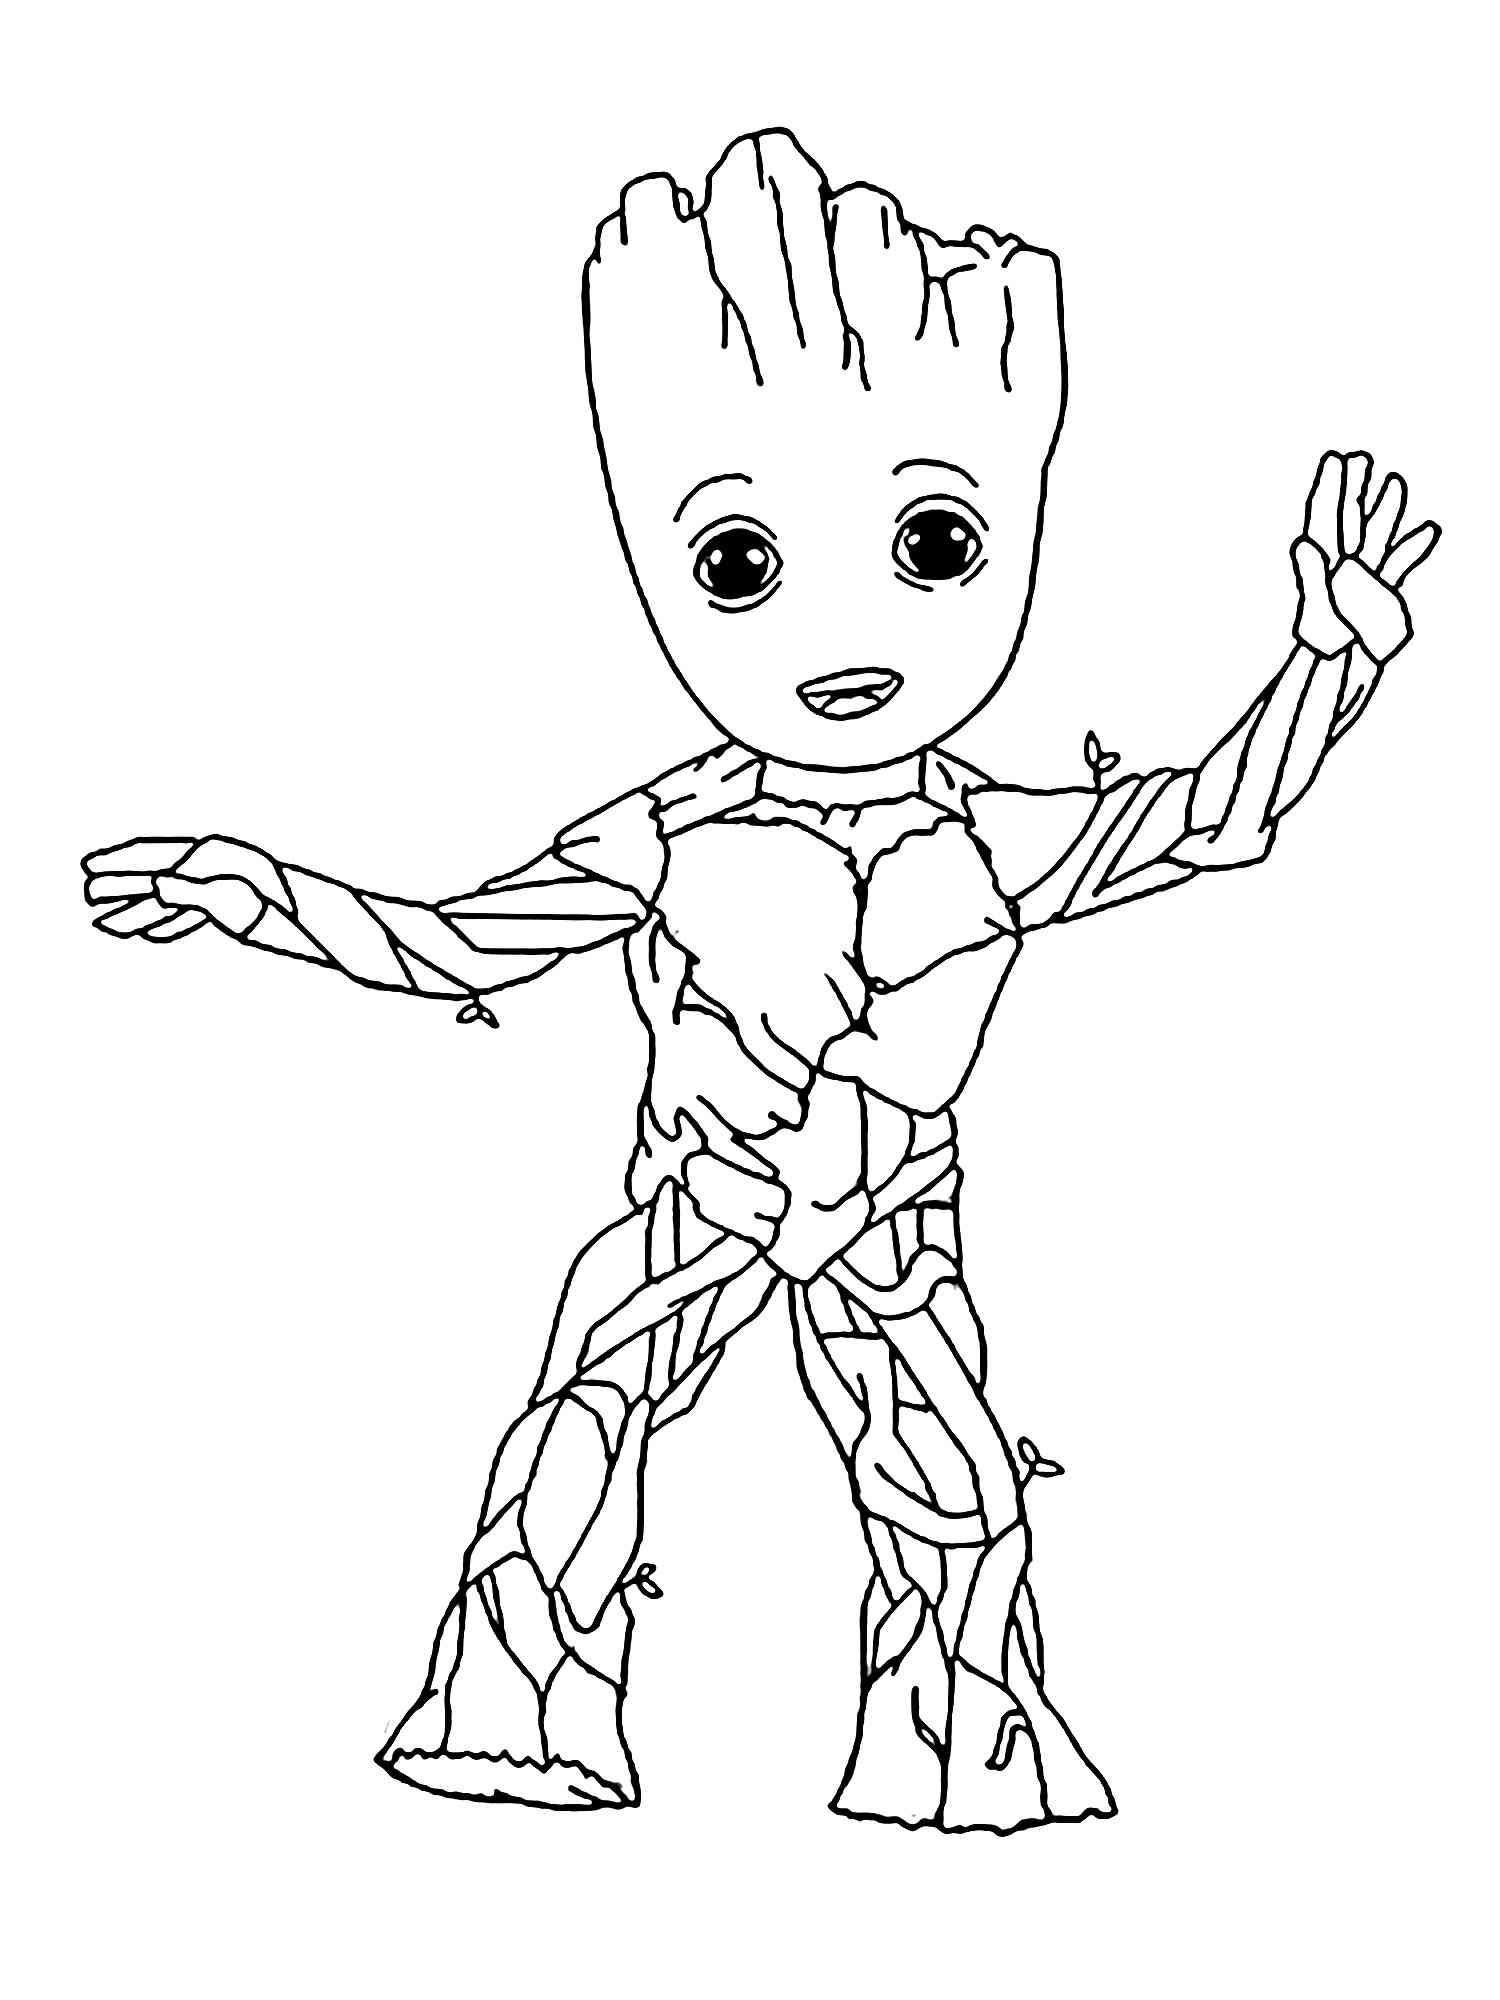 Little Groot coloring page